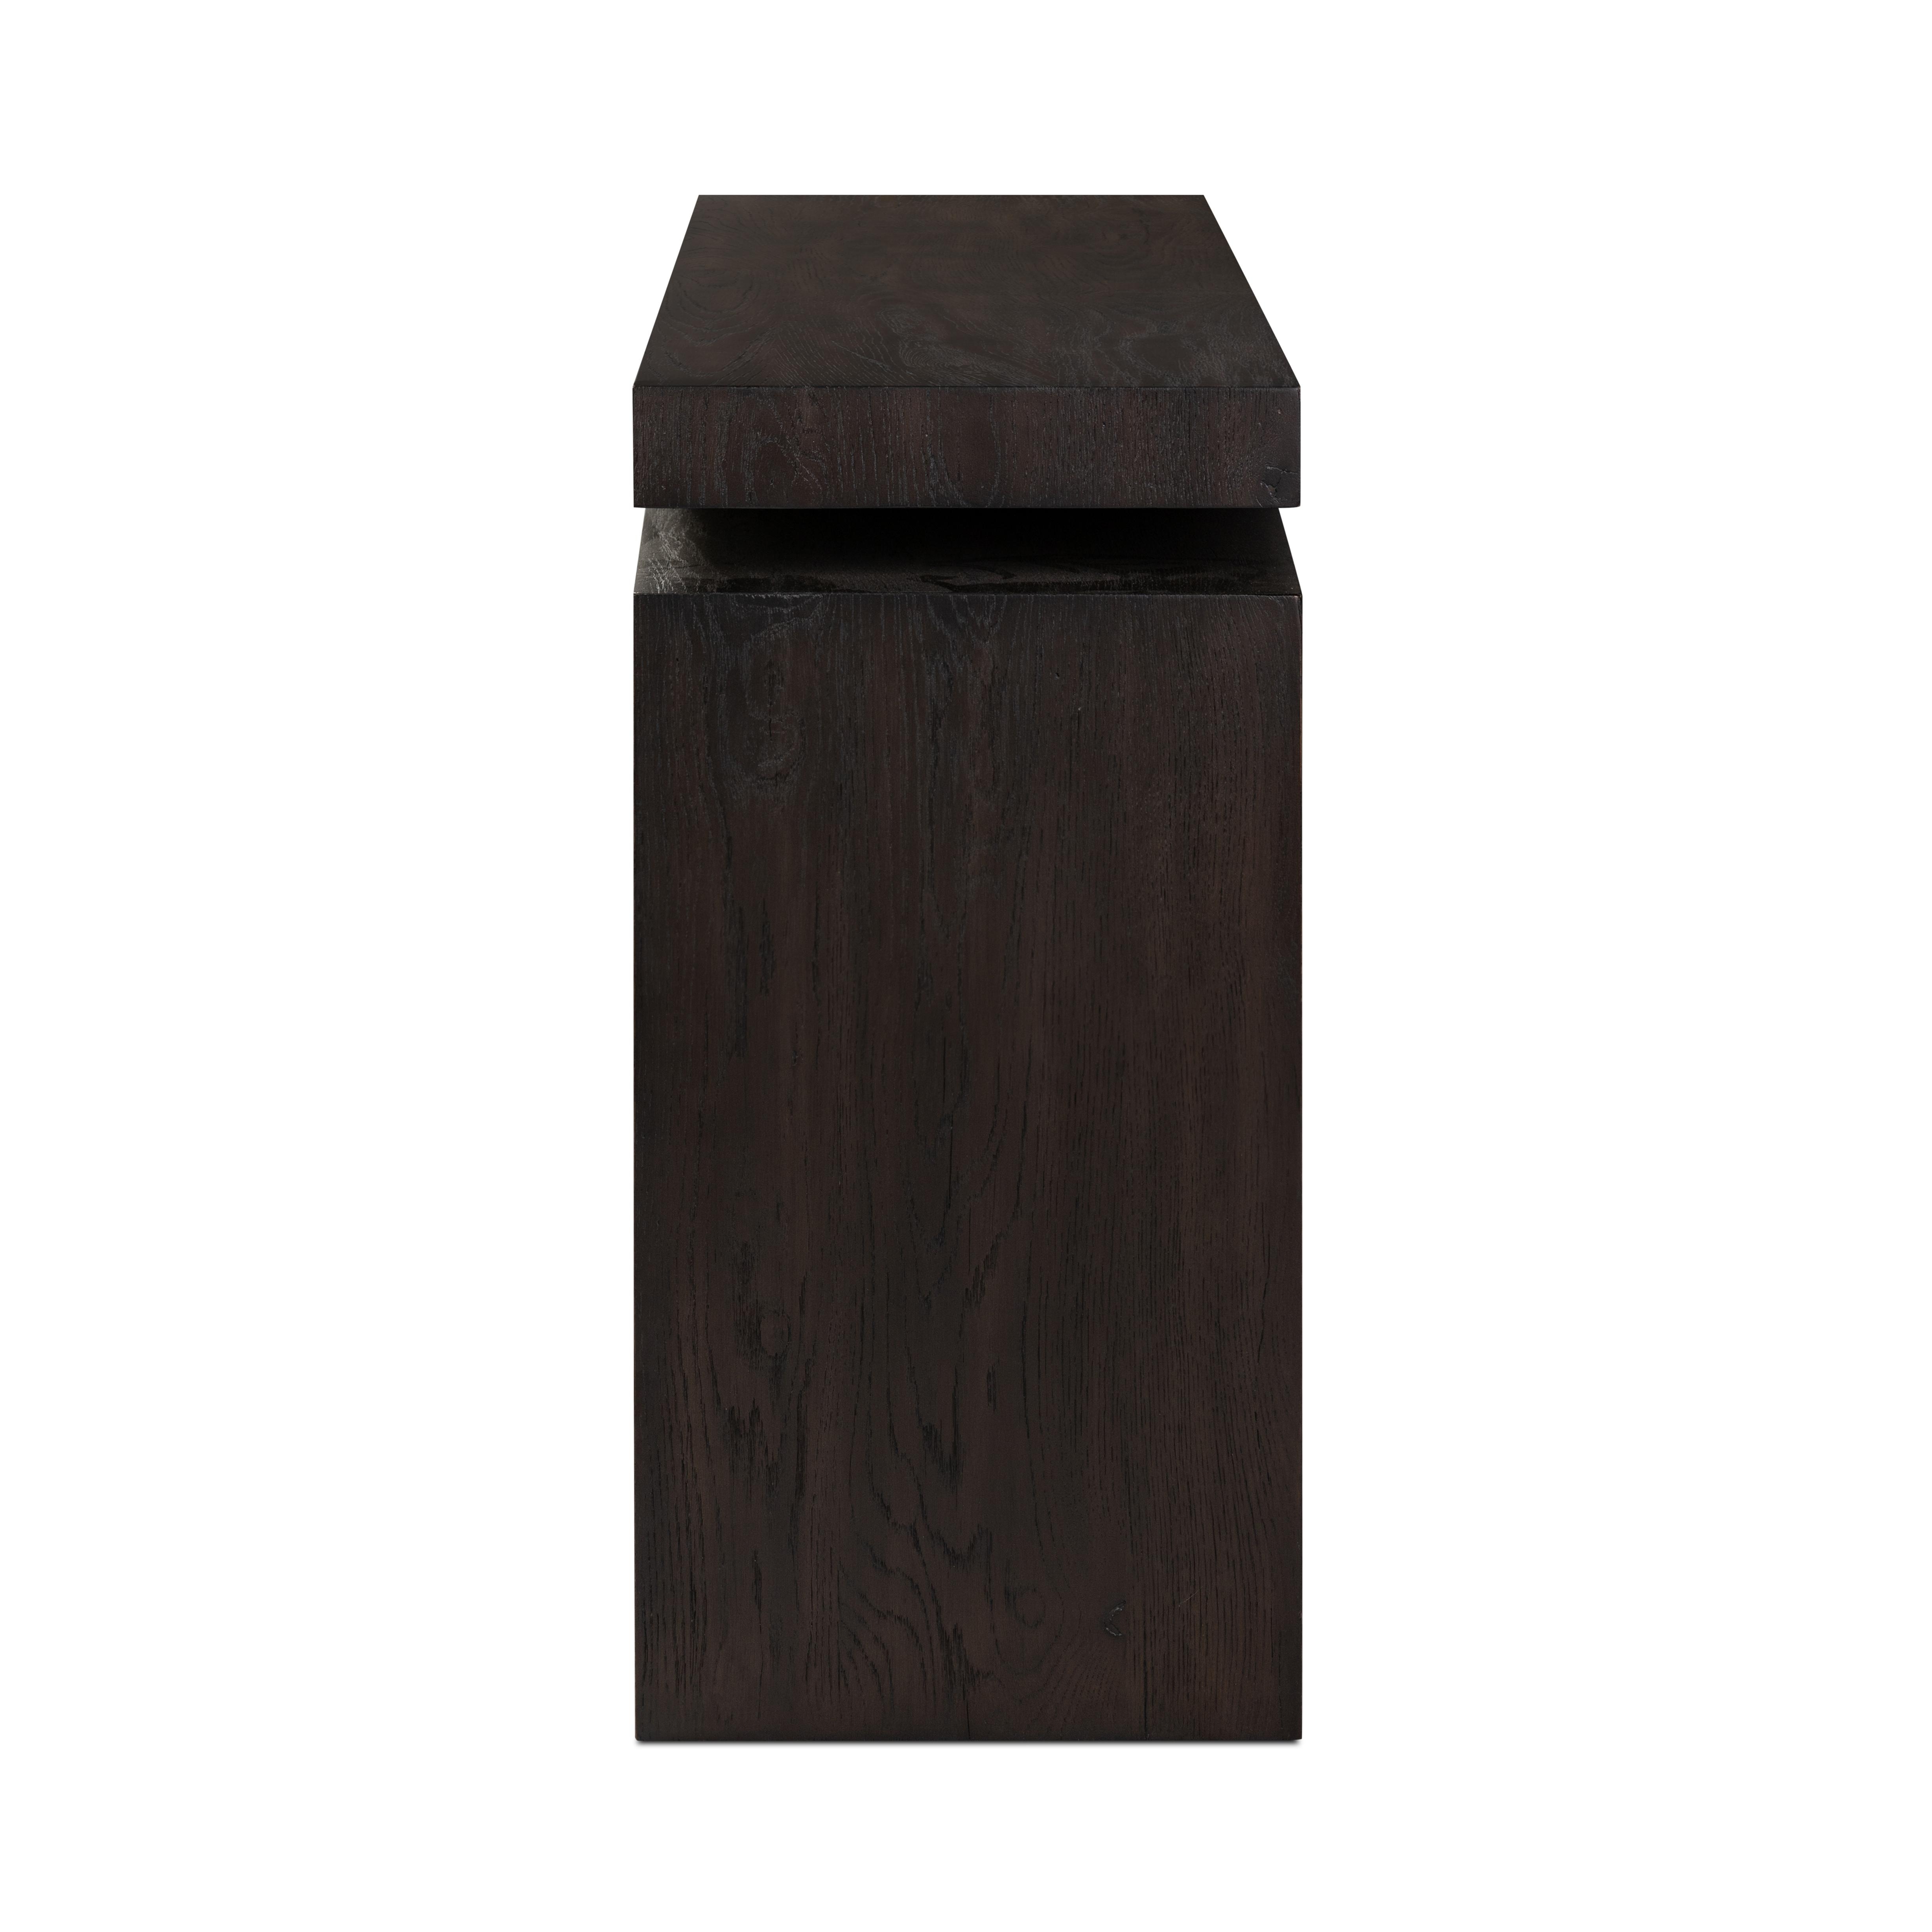 Matthes Console Table-Smoked Black - Image 3